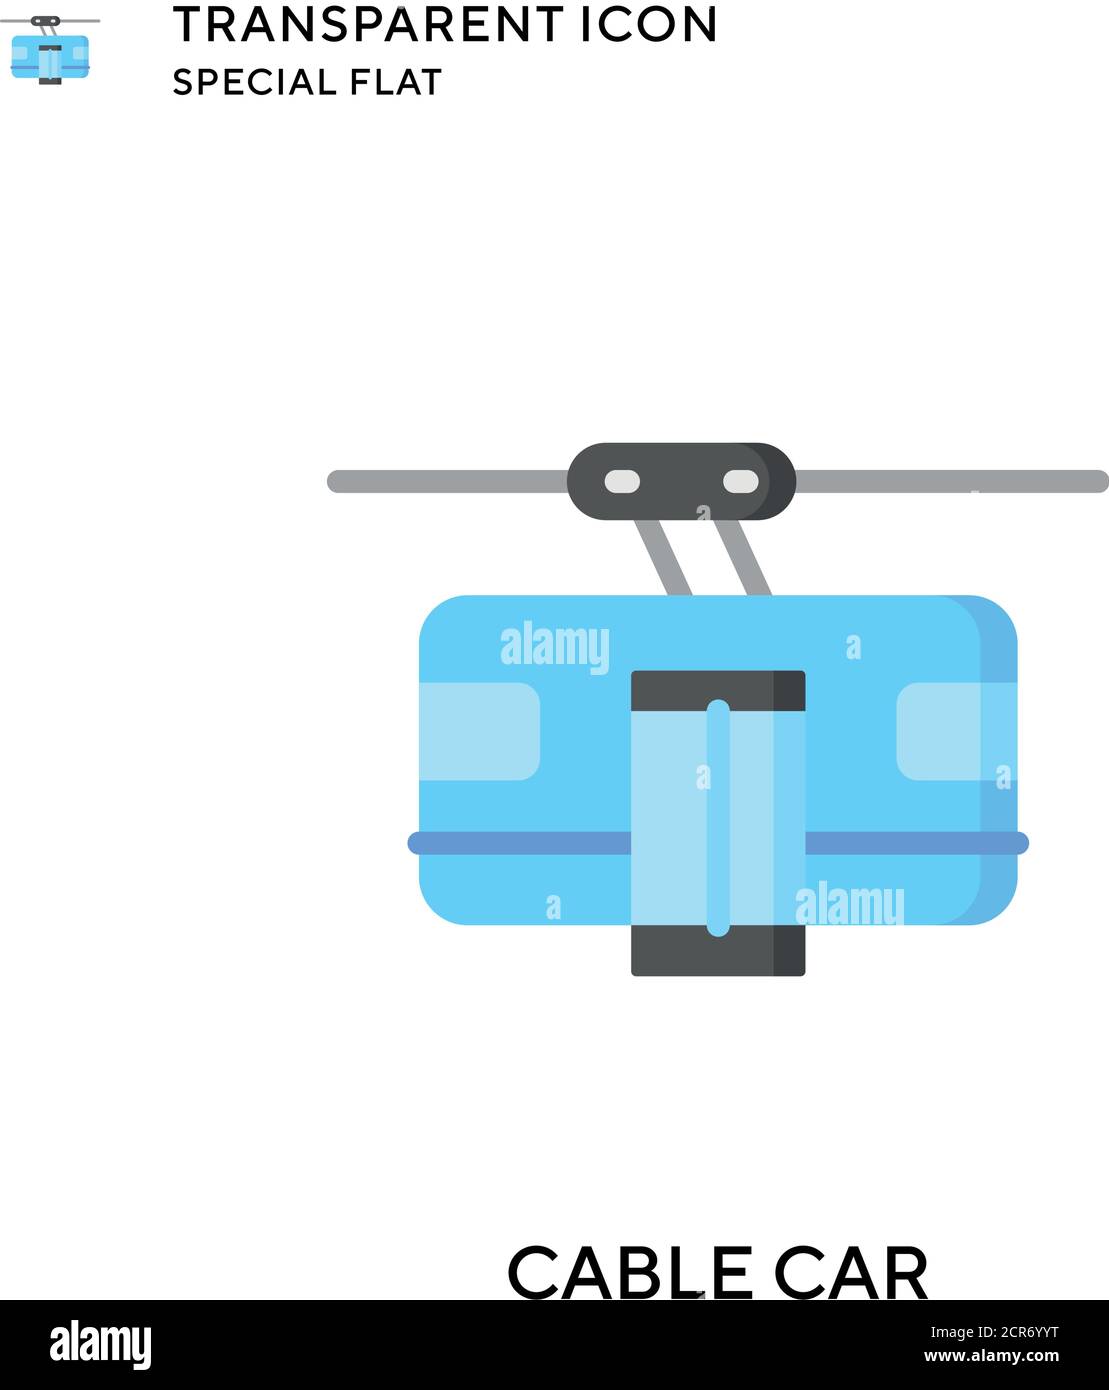 Cable car vector icon. Flat style illustration. EPS 10 vector. Stock Vector